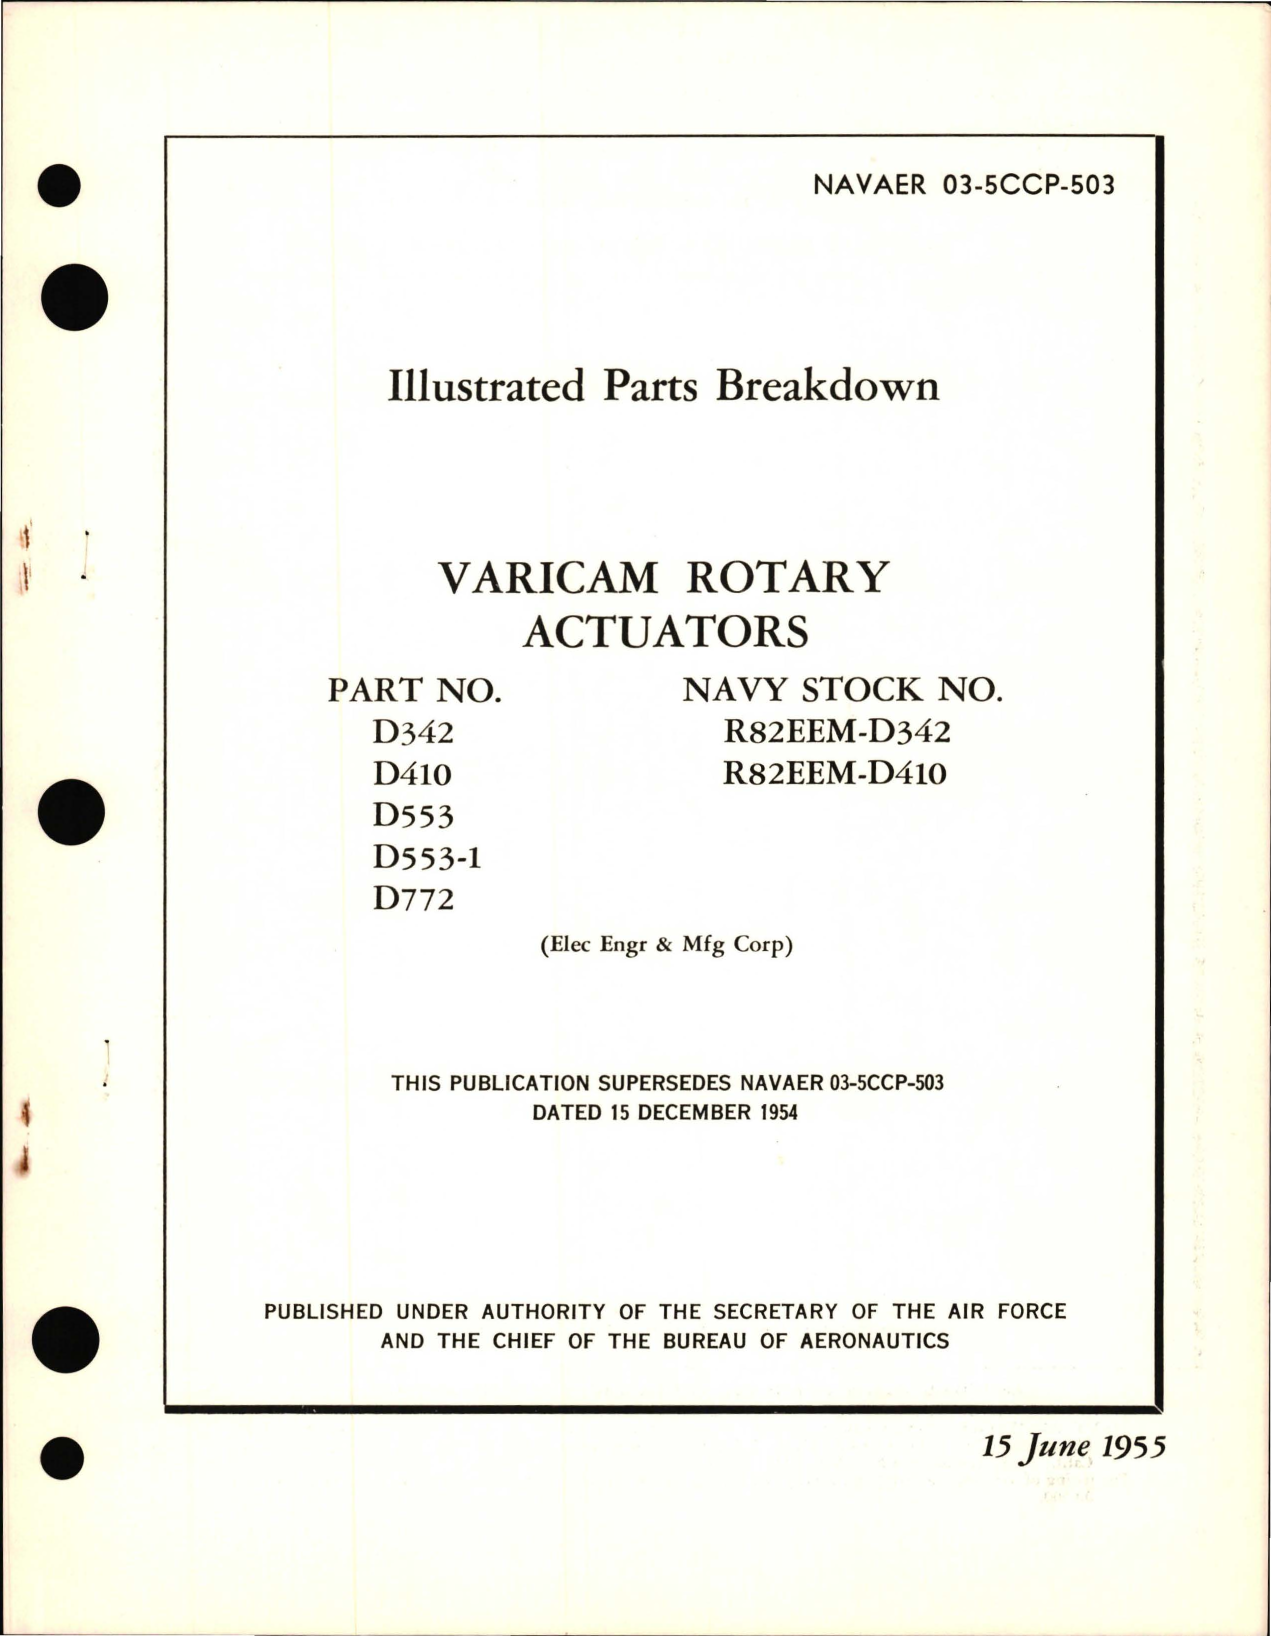 Sample page 1 from AirCorps Library document: Illustrated Parts Breakdown for Varicam Rotary Actuators - Part D342, D410, D553, D553-1 and D772